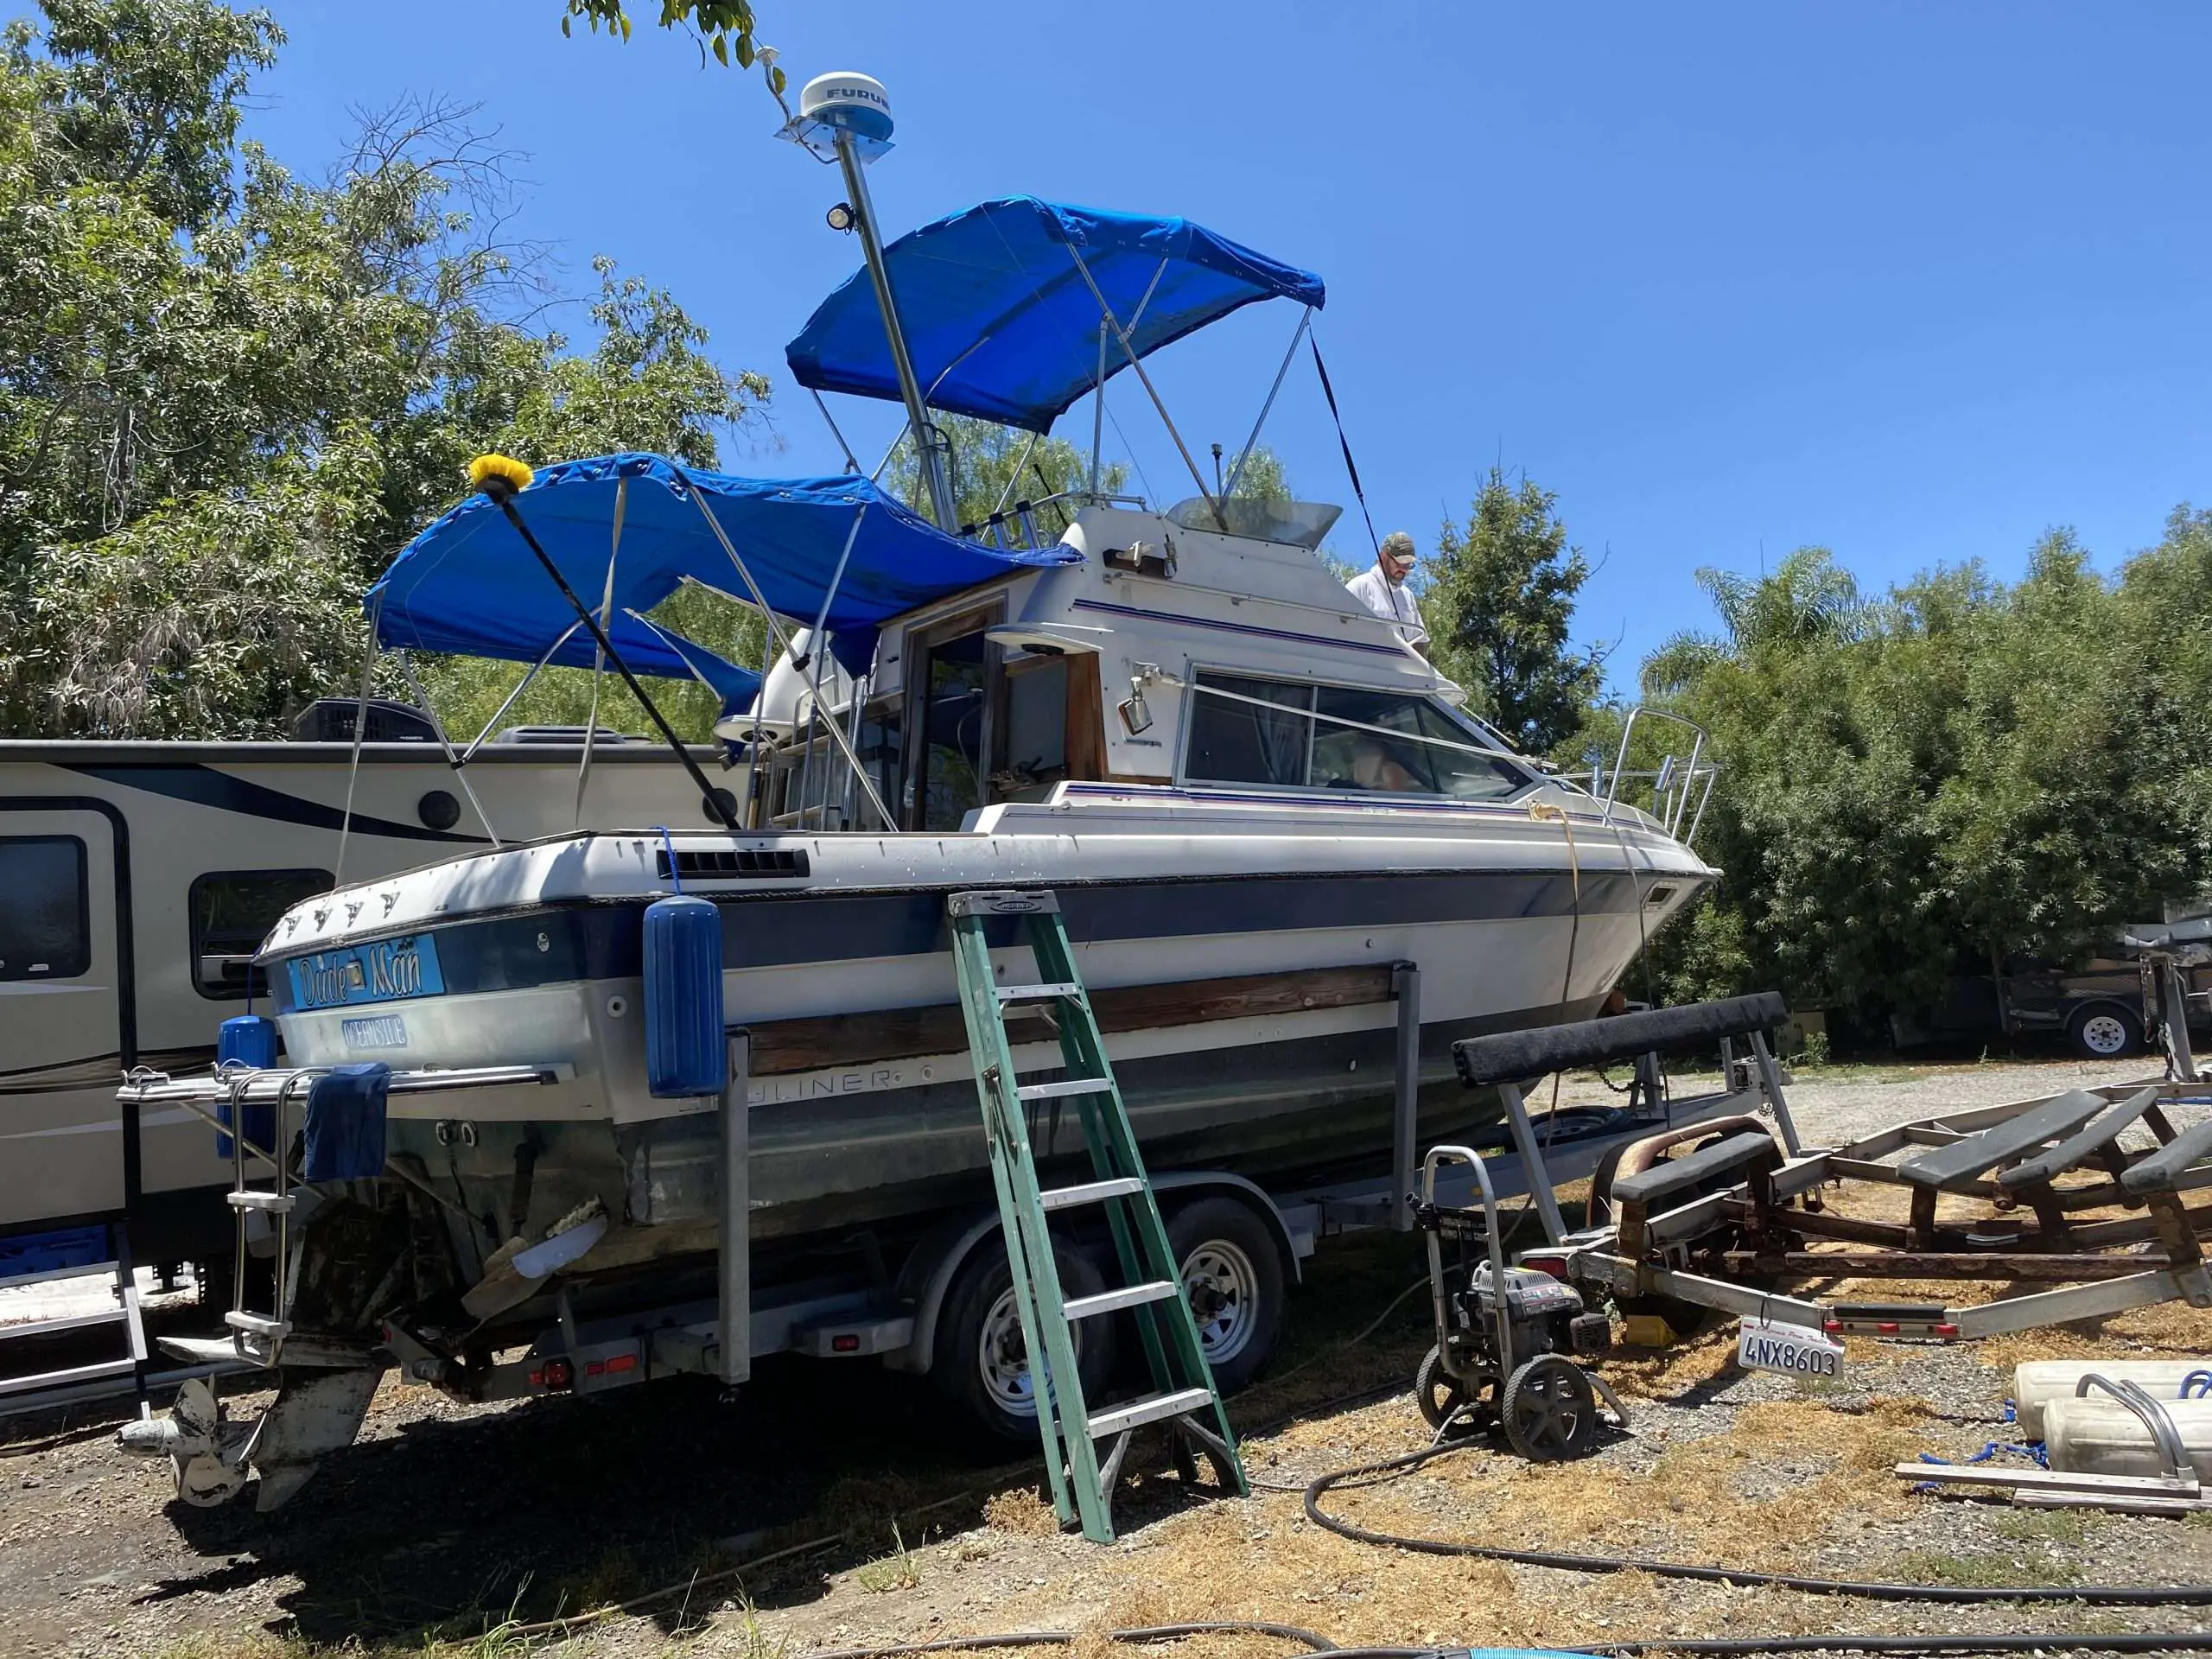 Whats my boat worth?